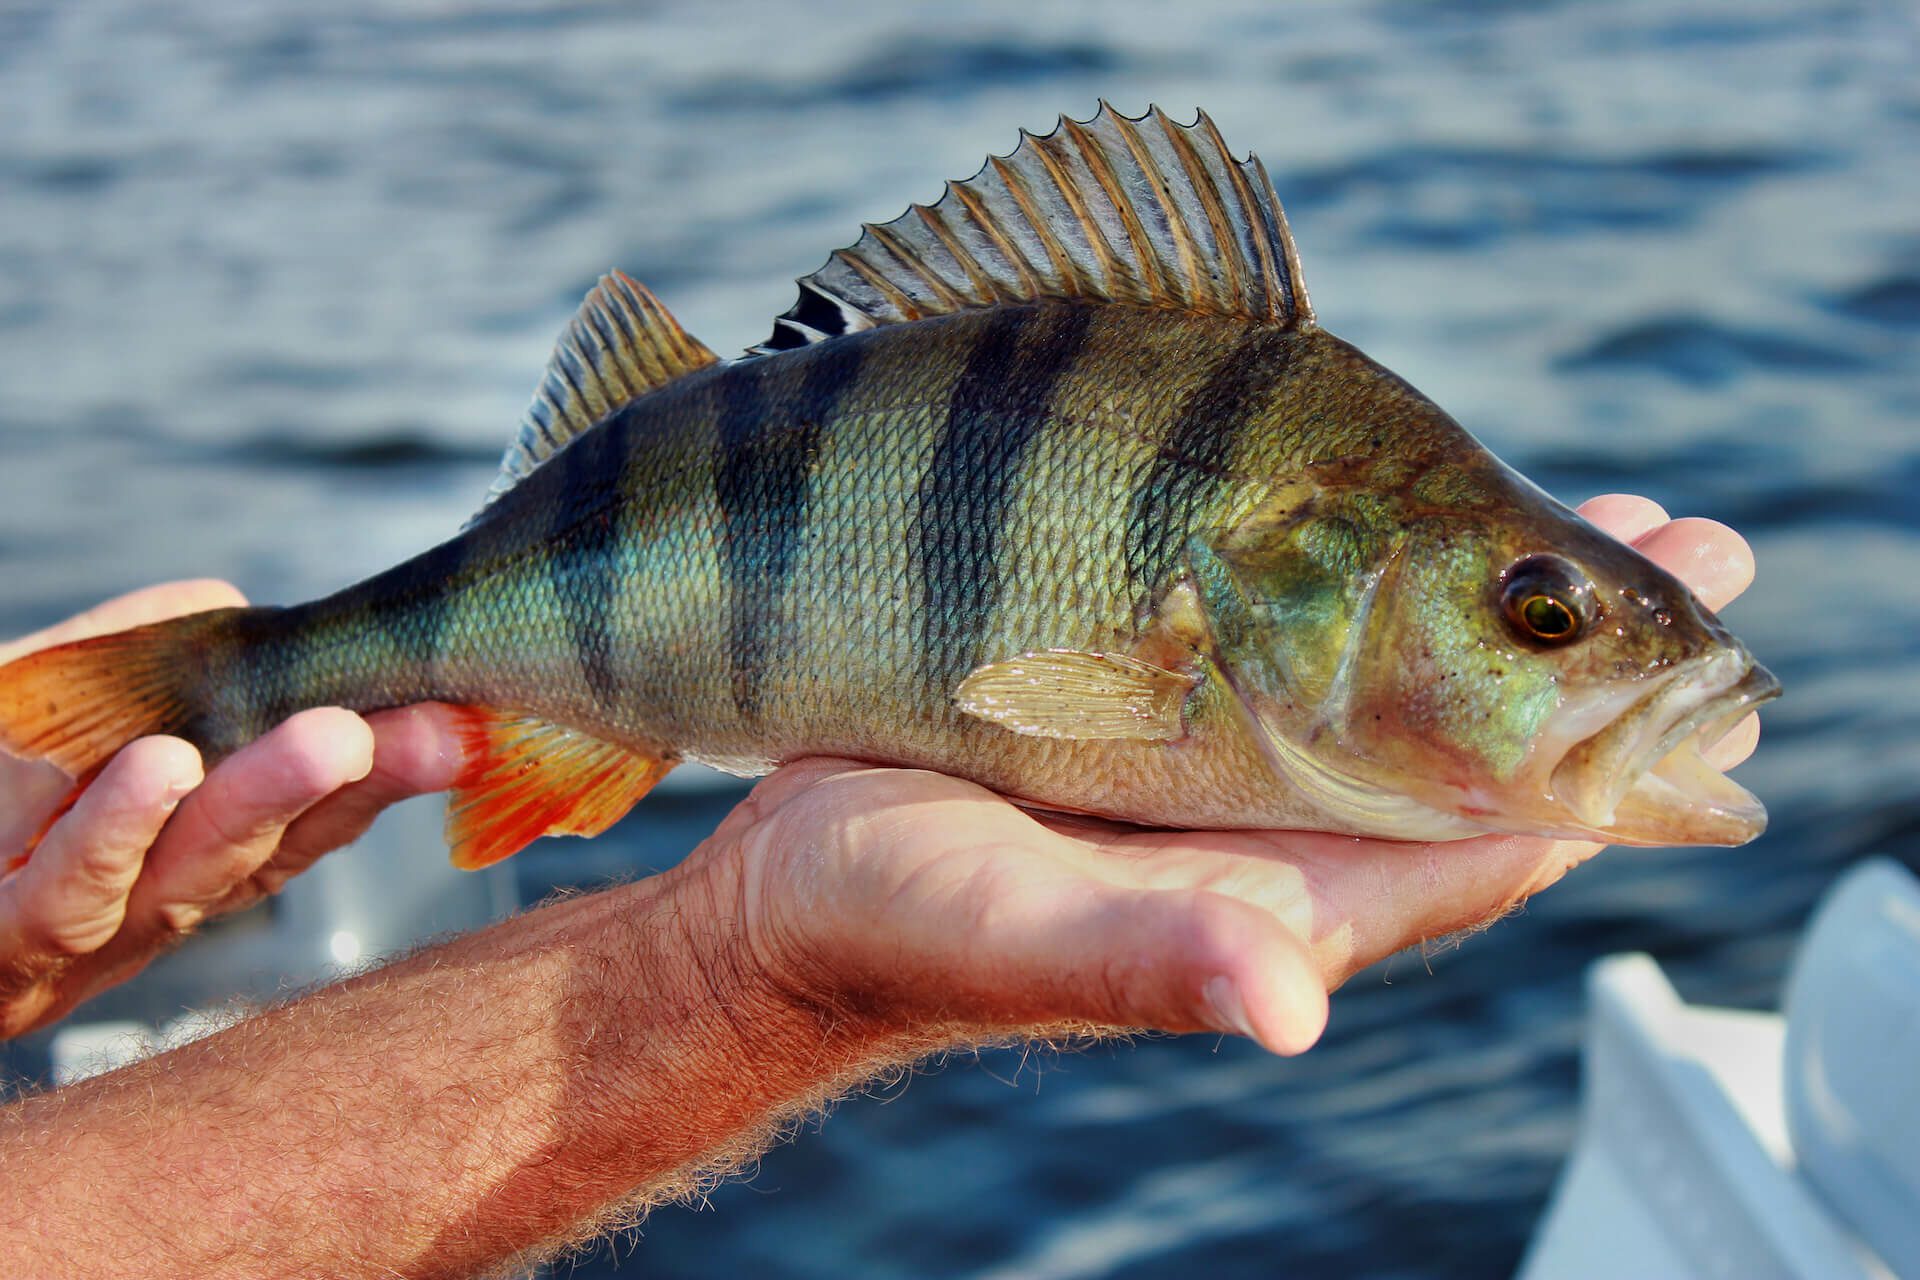 A beautiful perch with its signature dorsal fin